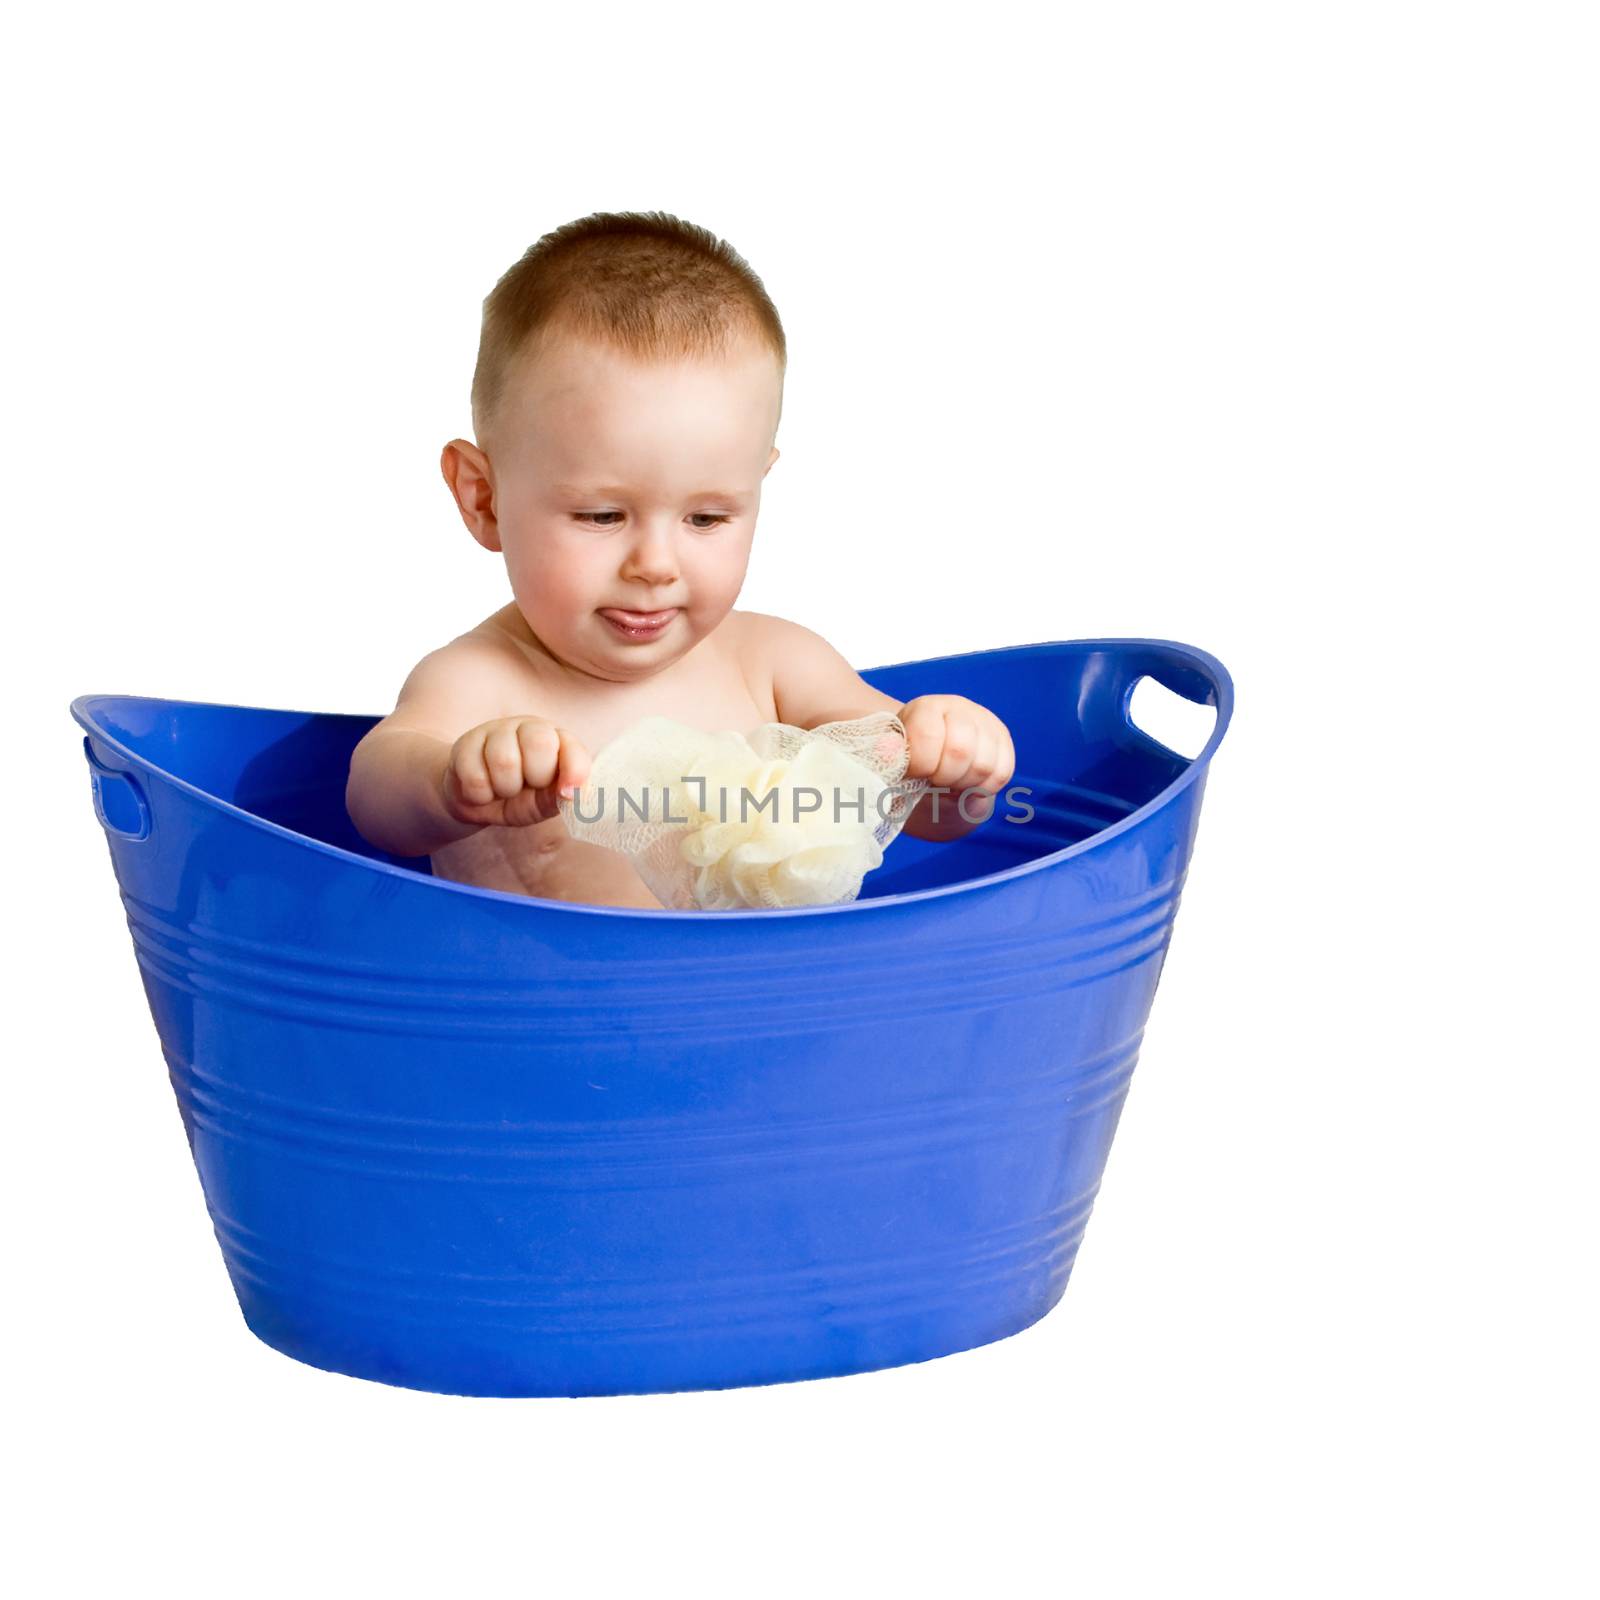 Baby Playing In A Plastic Tub by rcarner